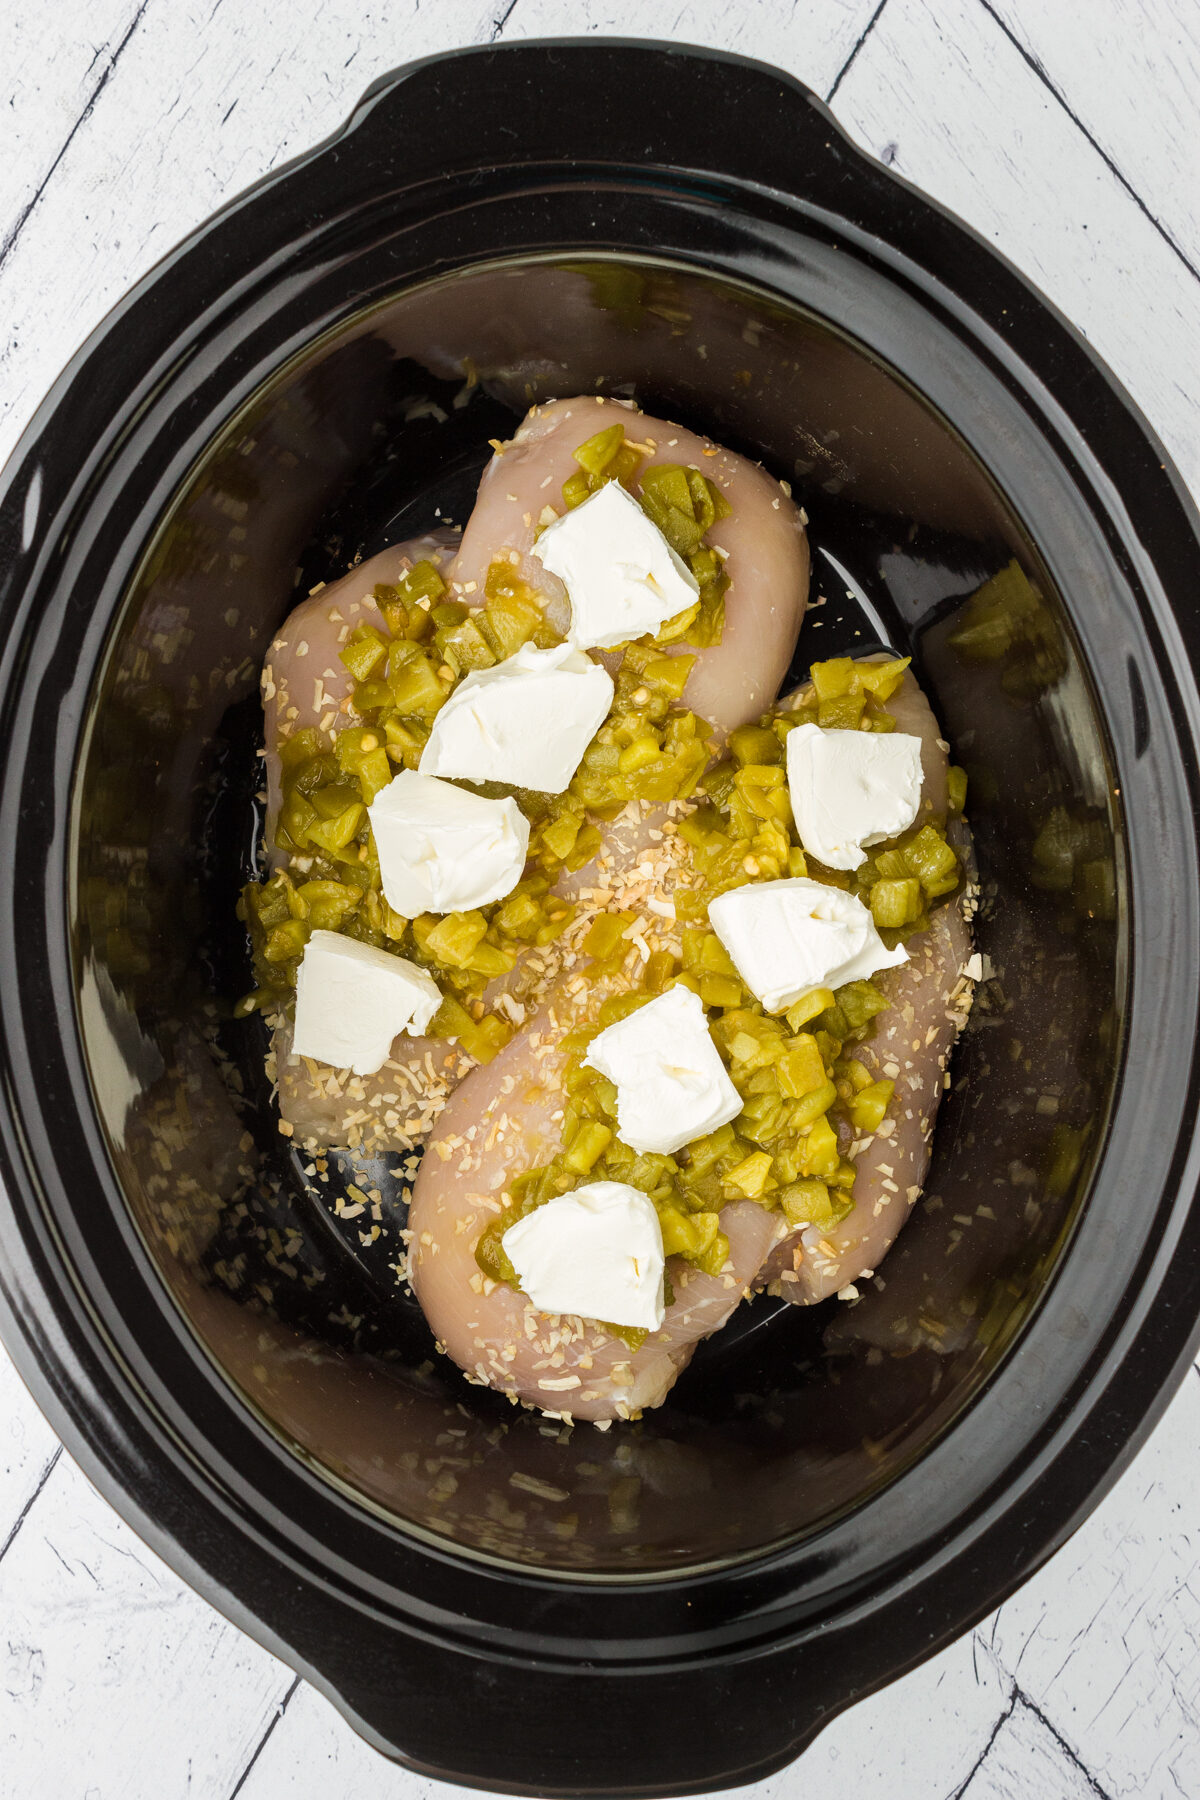 layering the simple ingredients for this shredded chicken recipe into the slow cooker